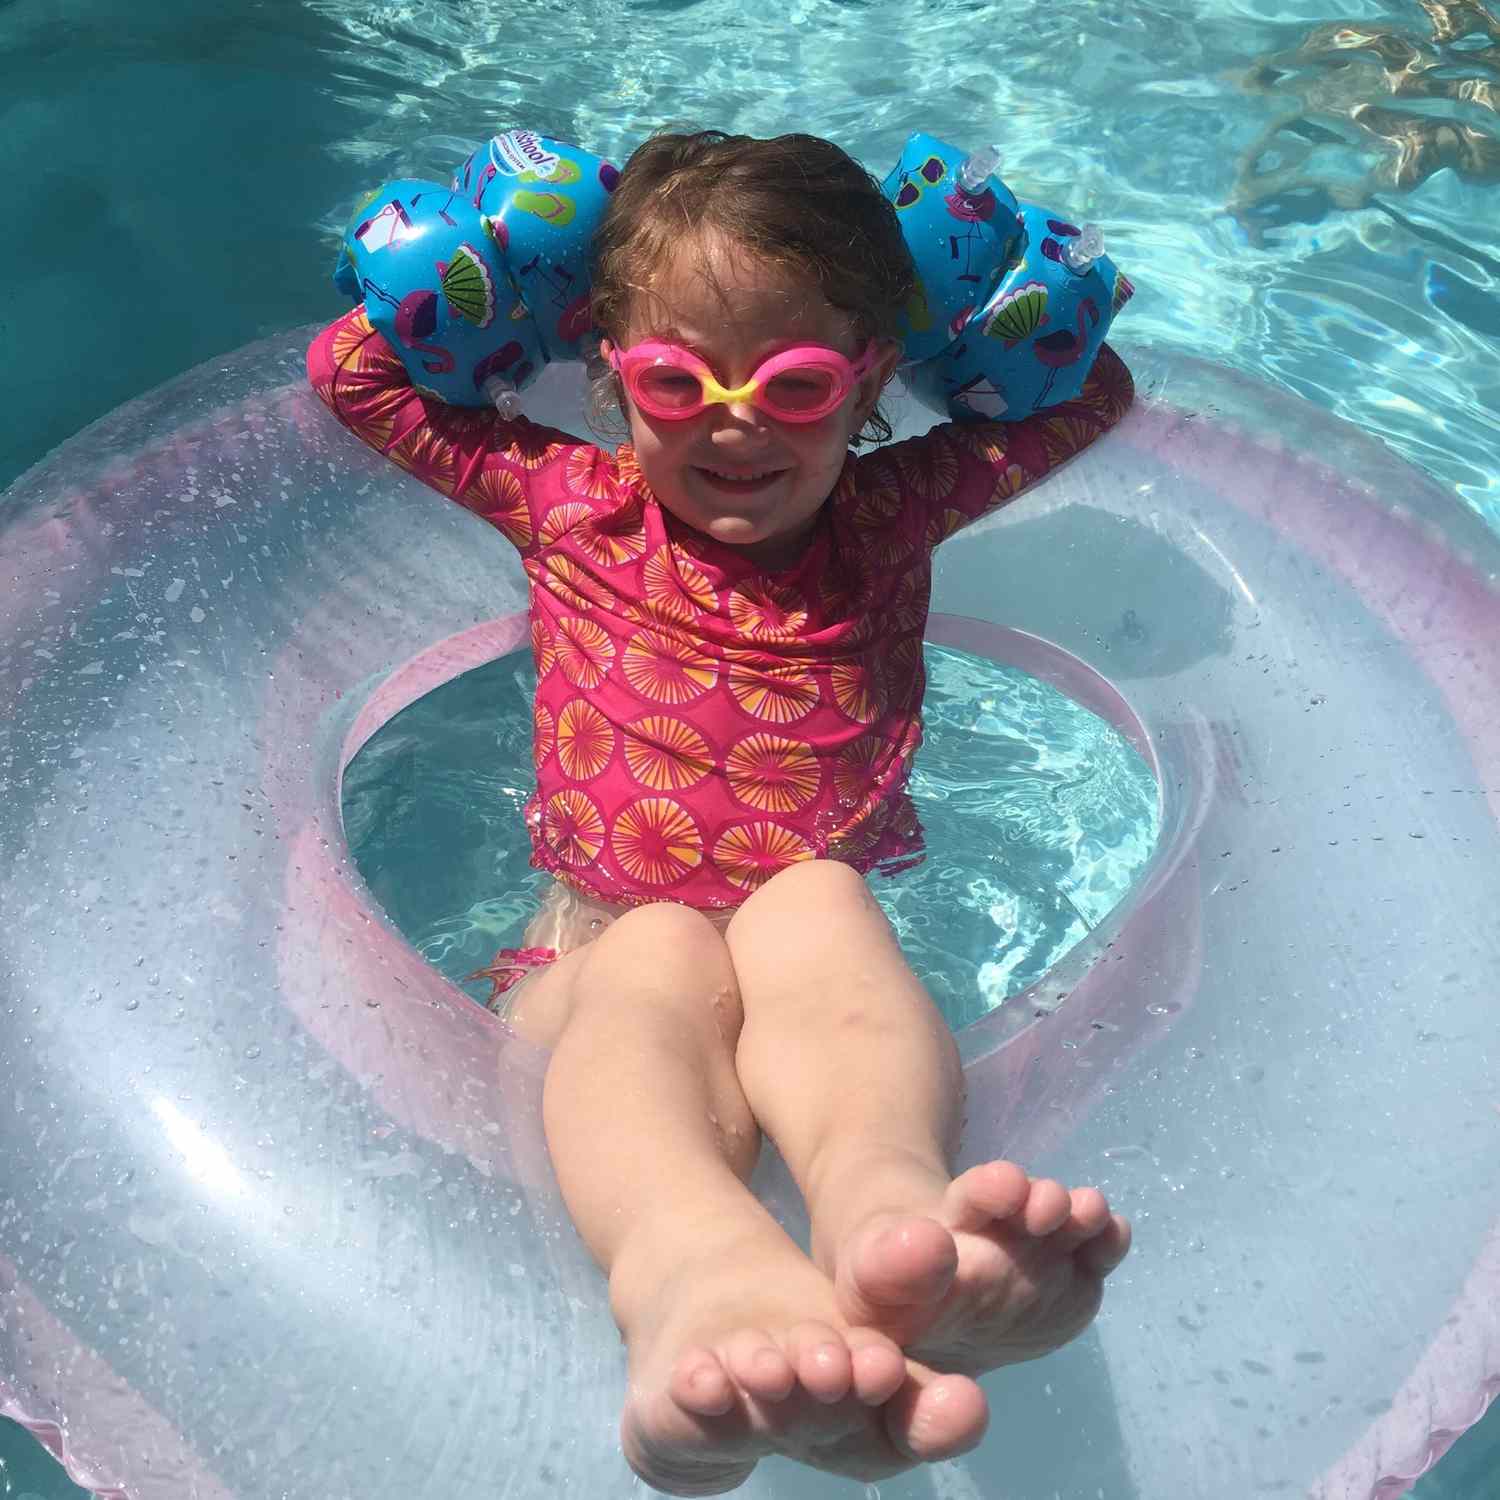 Child floating in swimming pool